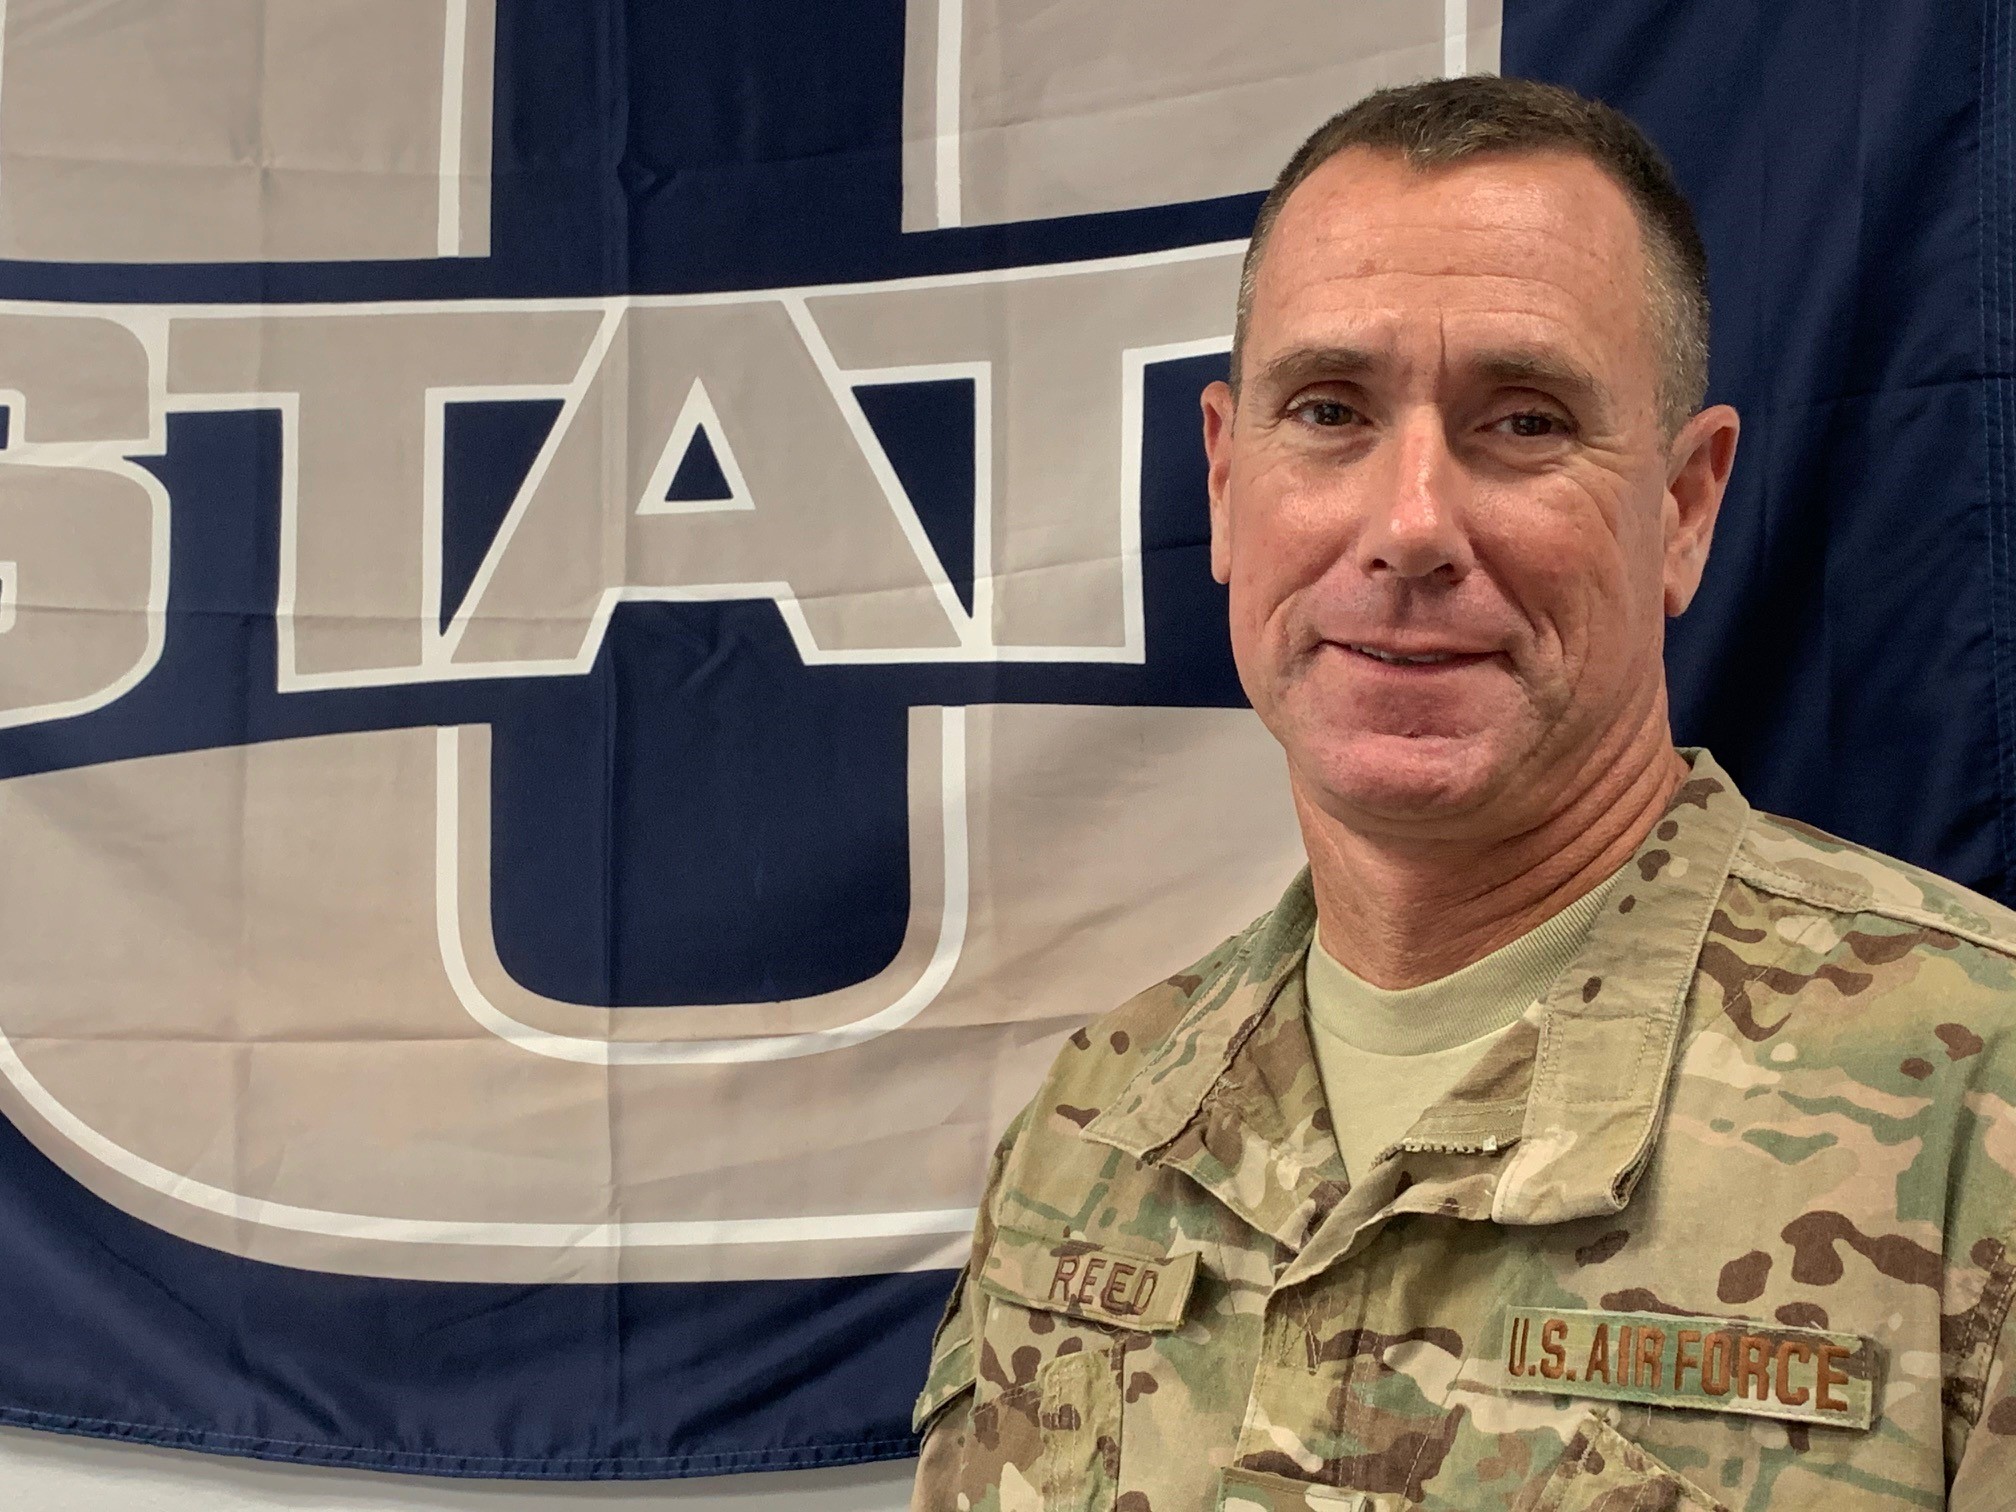 Col. Reed standing in front of a USU banner